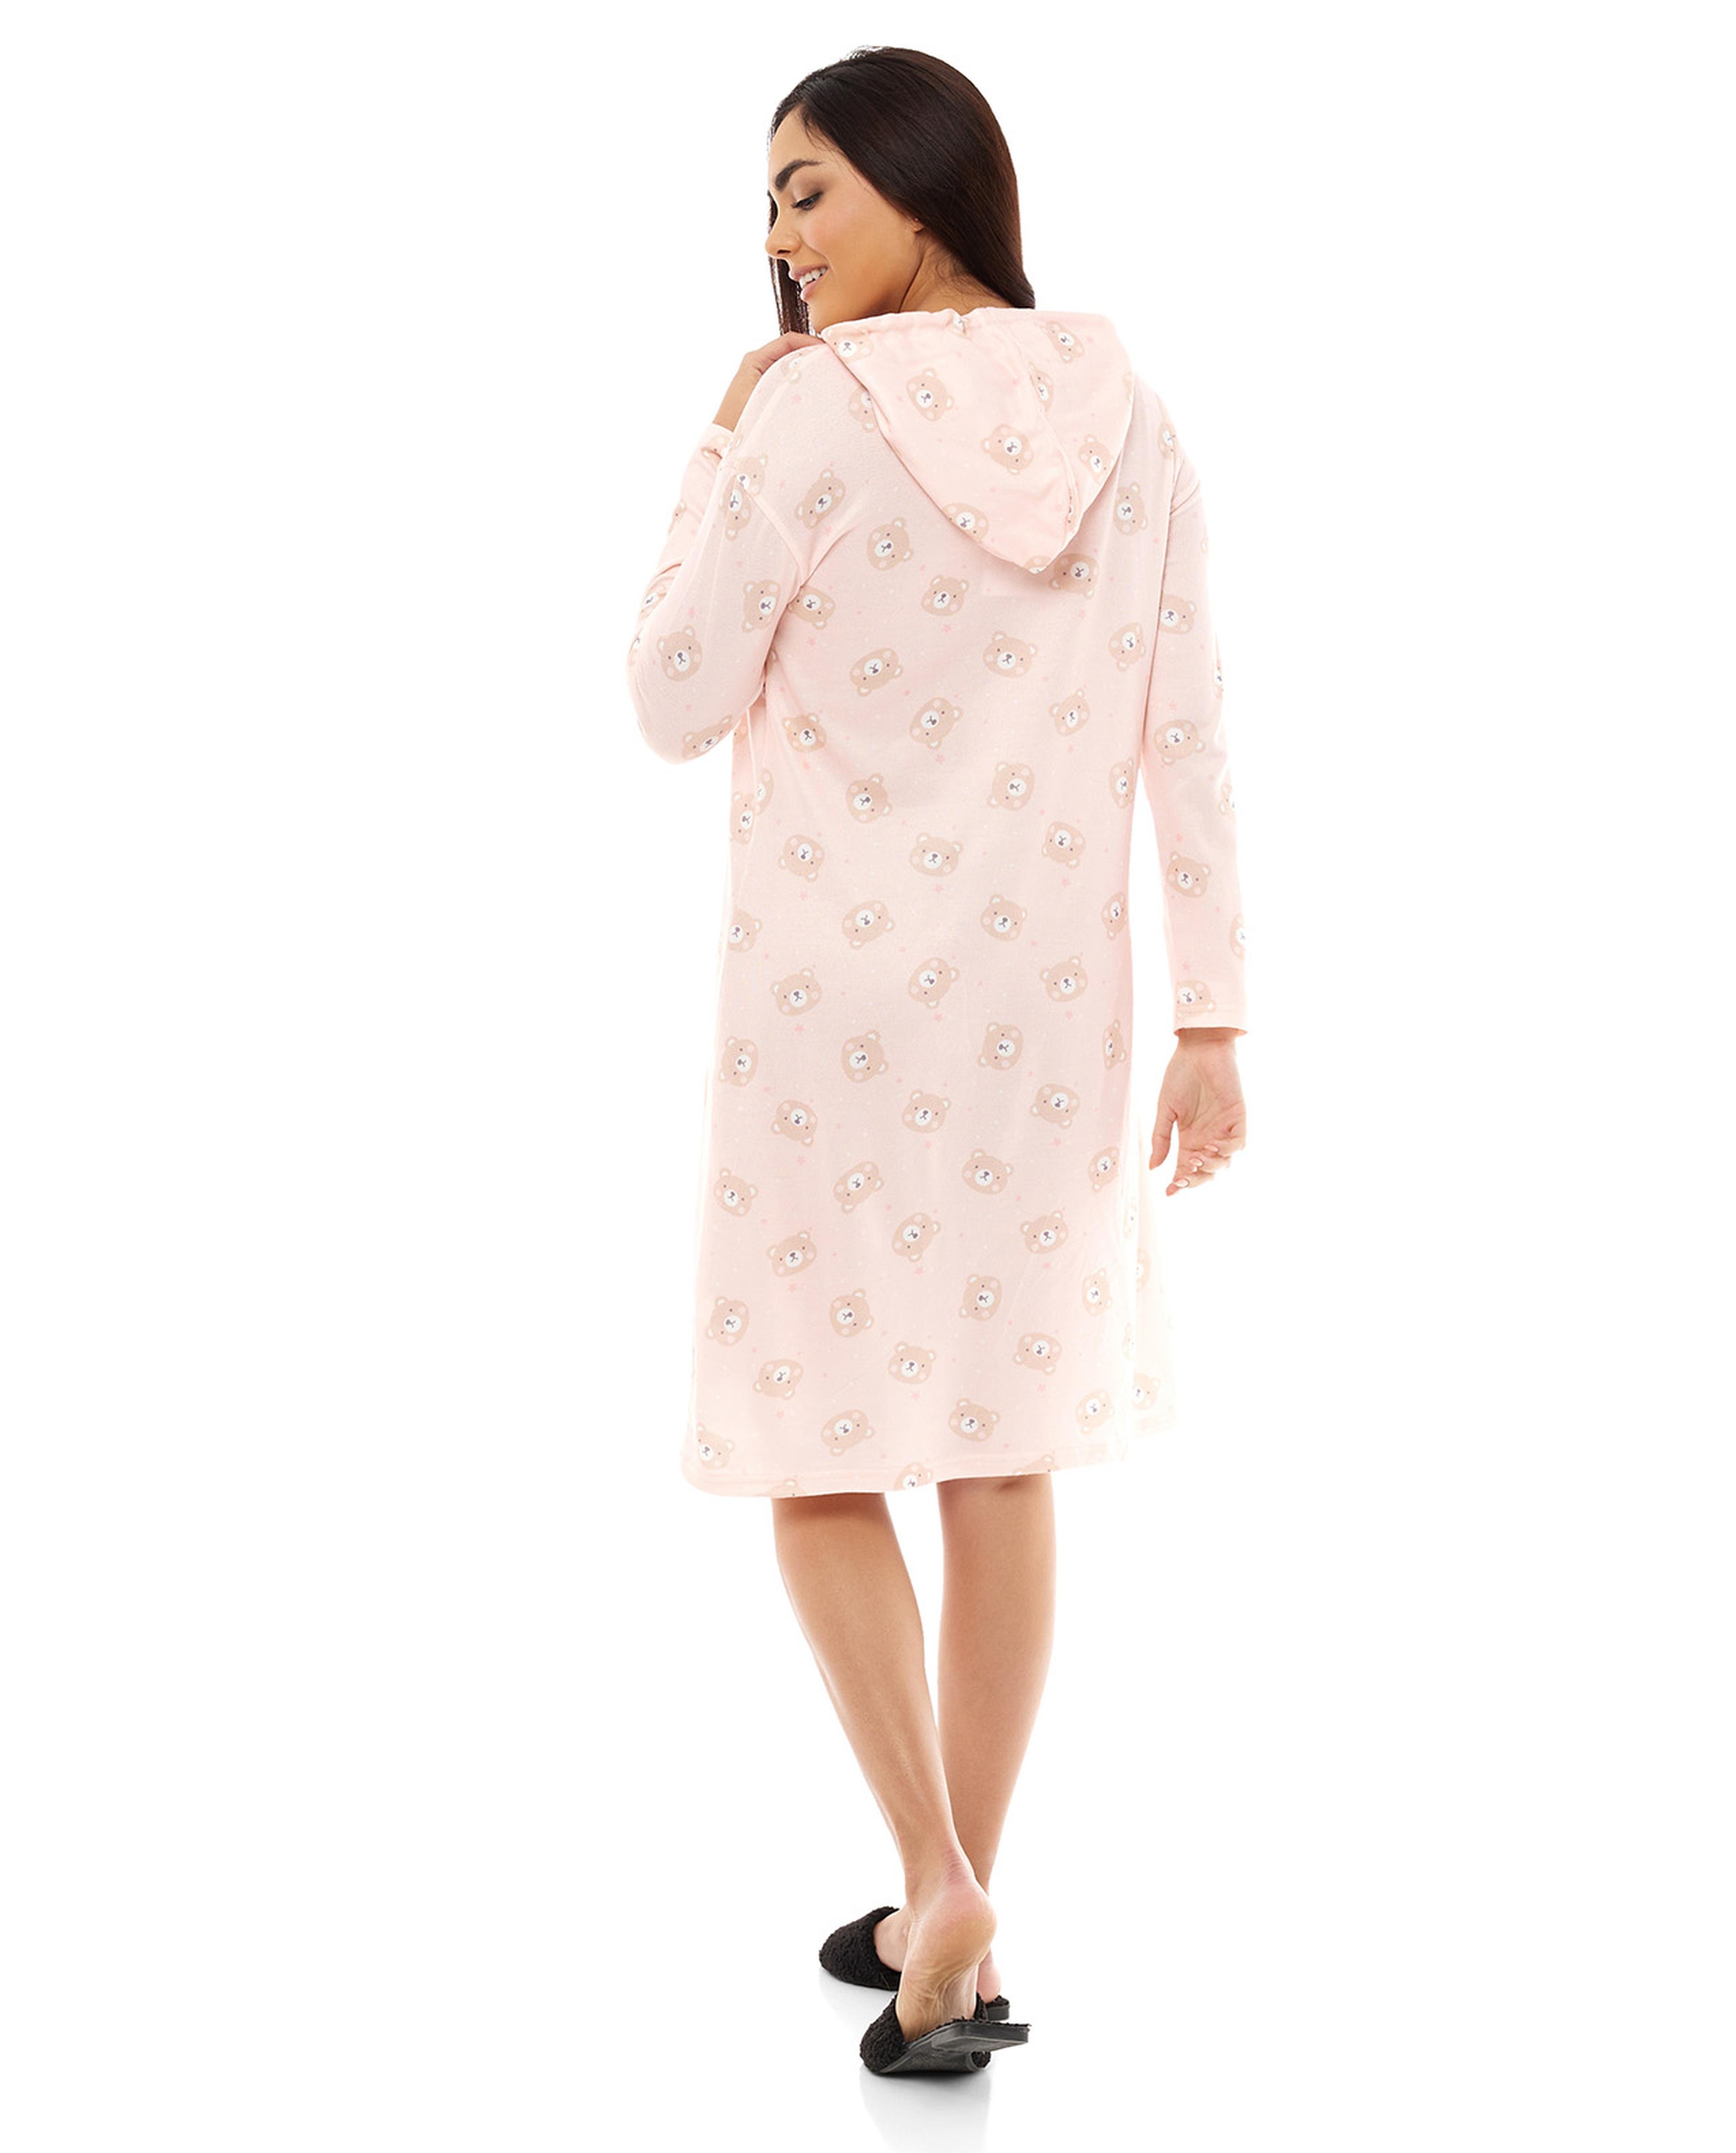 Printed Hooded Nightdress with Long Sleeves